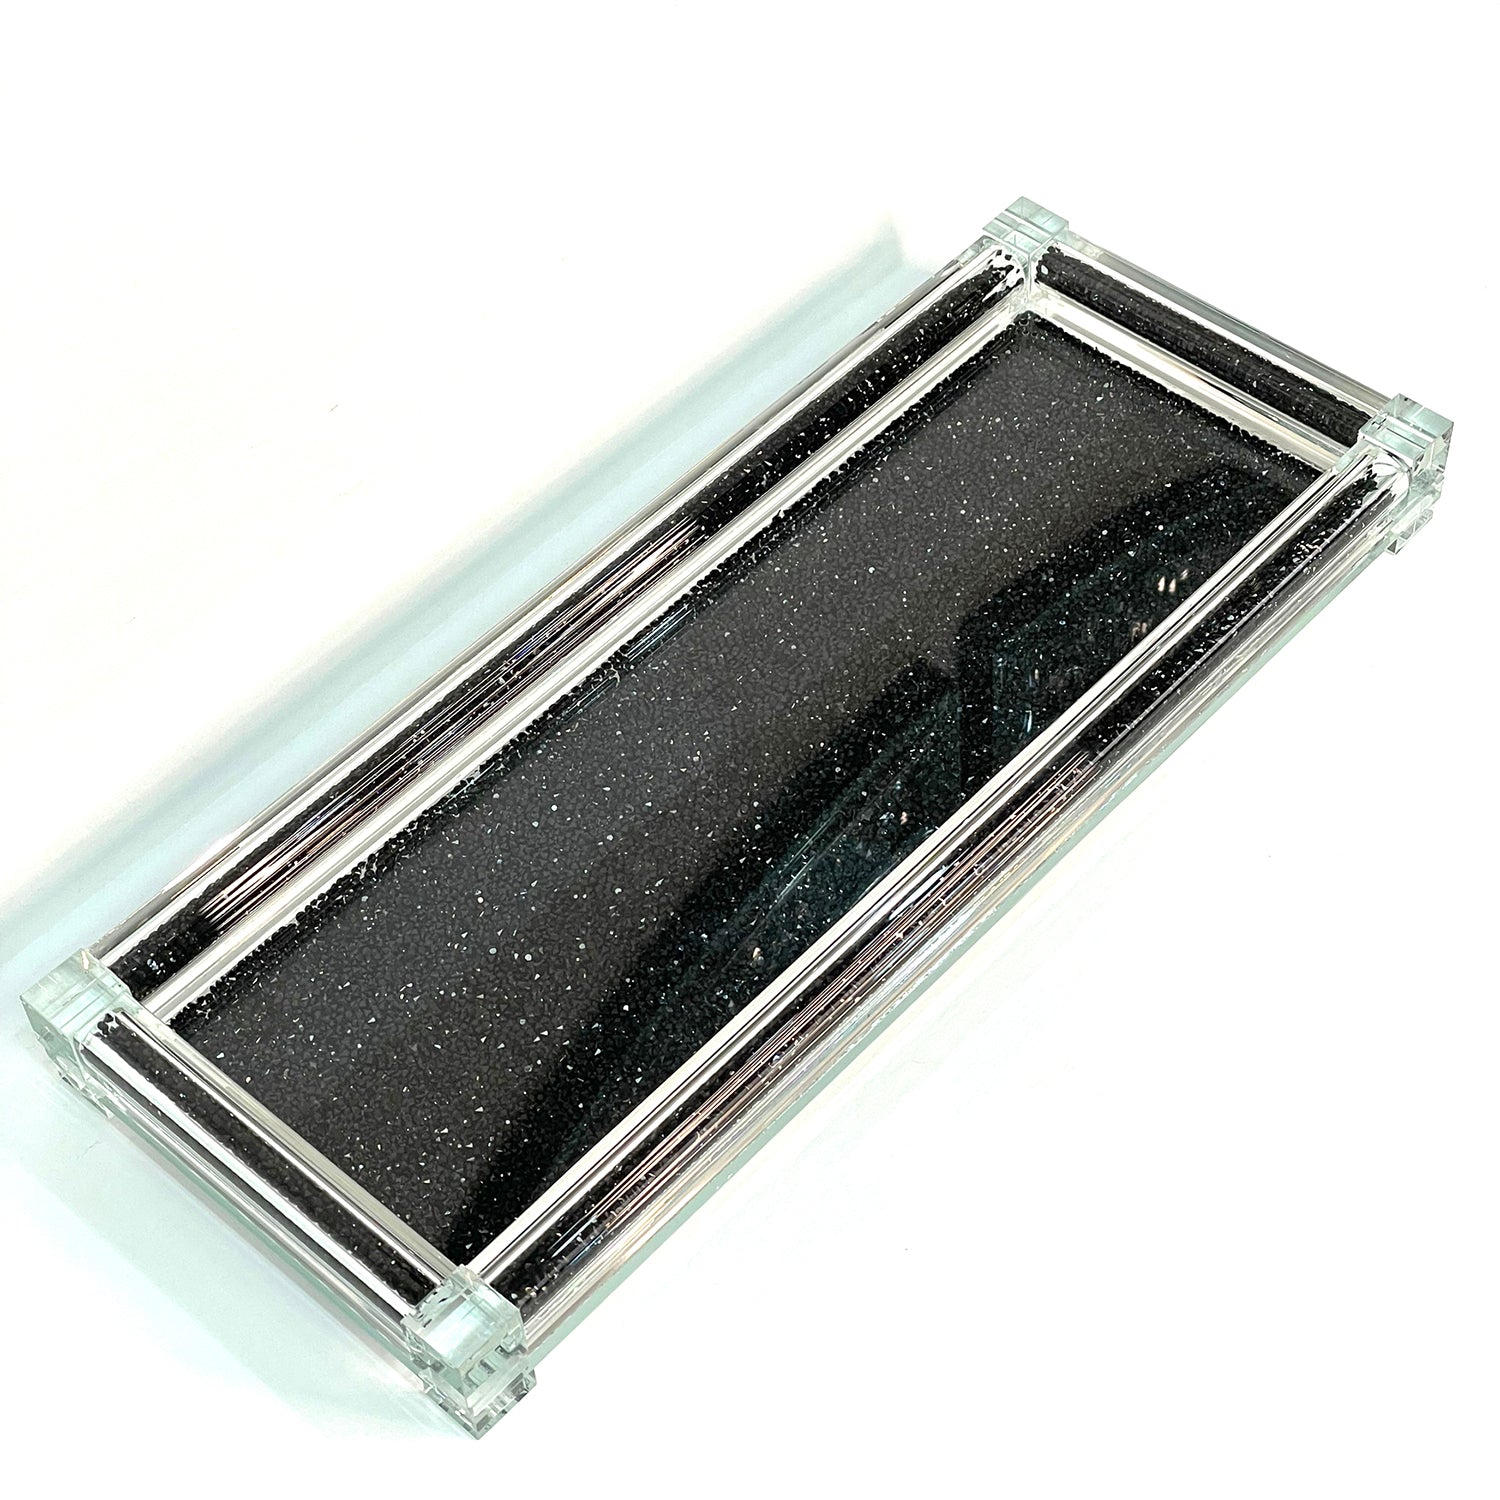 Ambrose Exquisite Medium Glass Tray in Gift Box black-glass